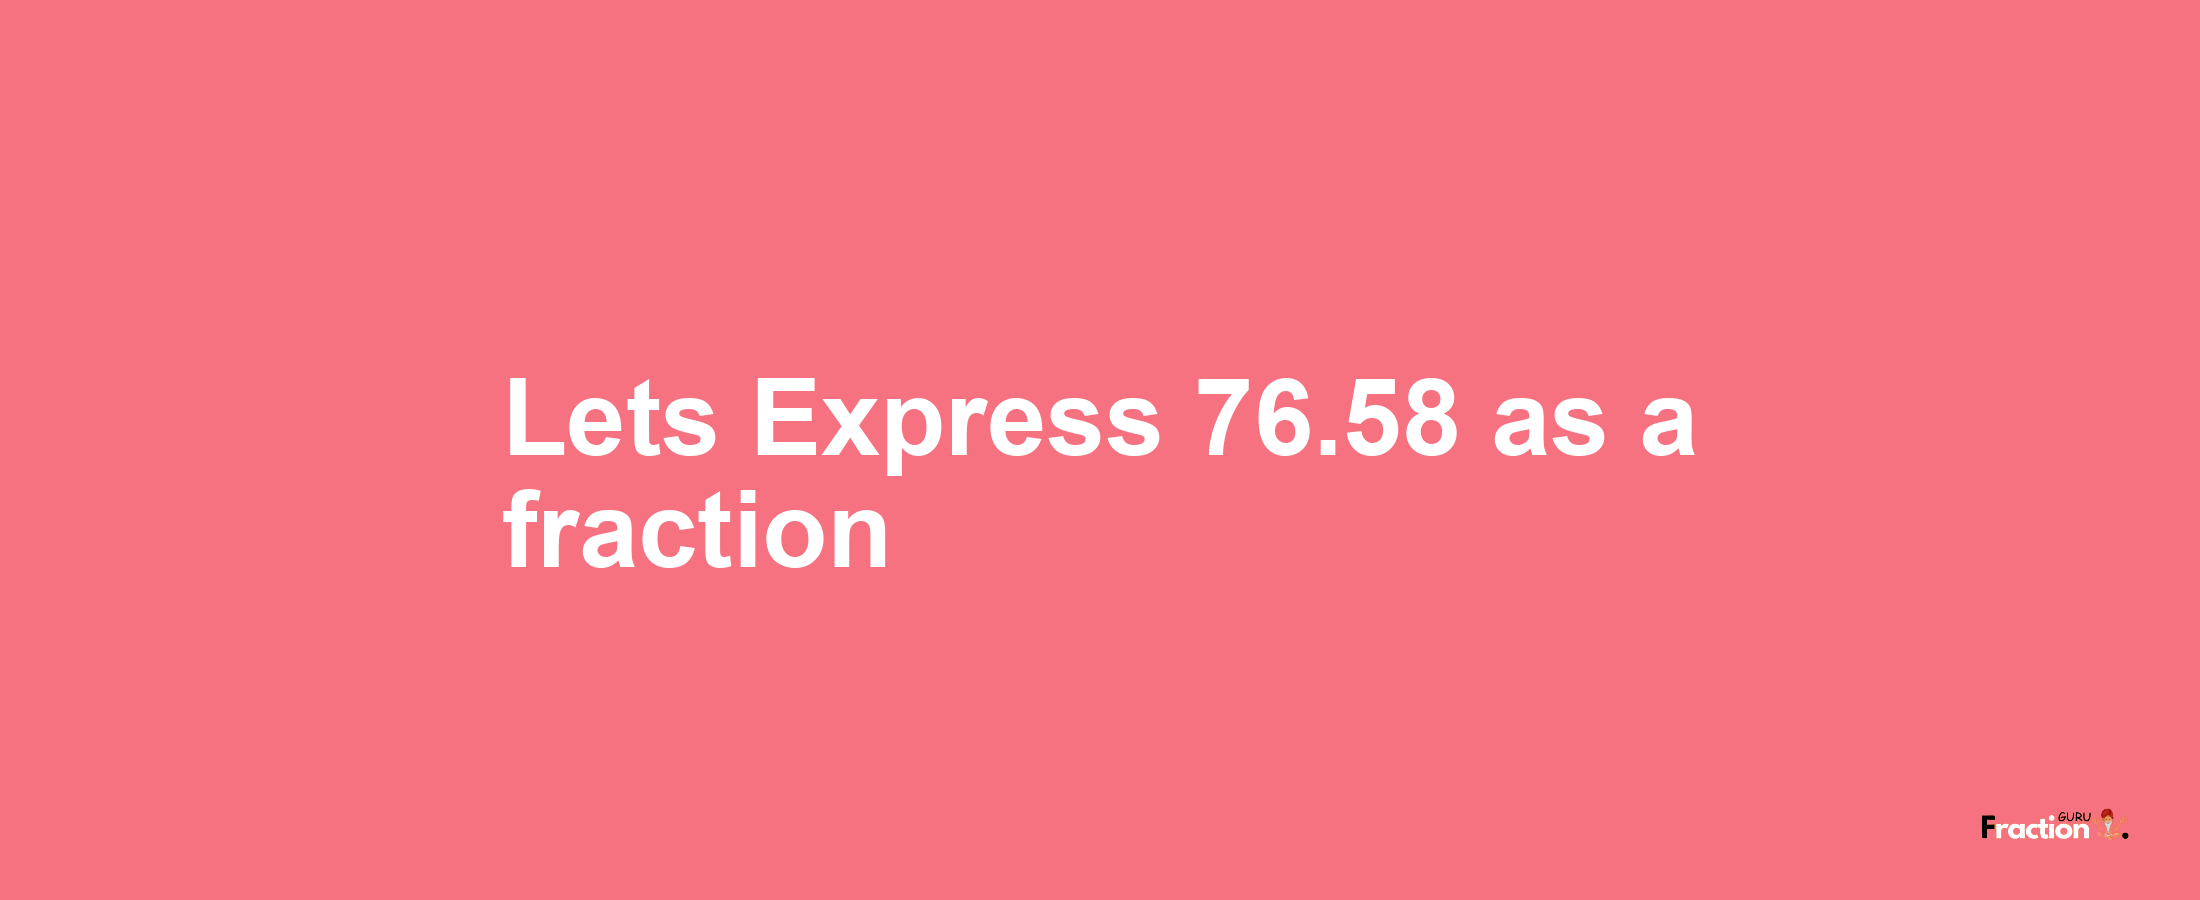 Lets Express 76.58 as afraction